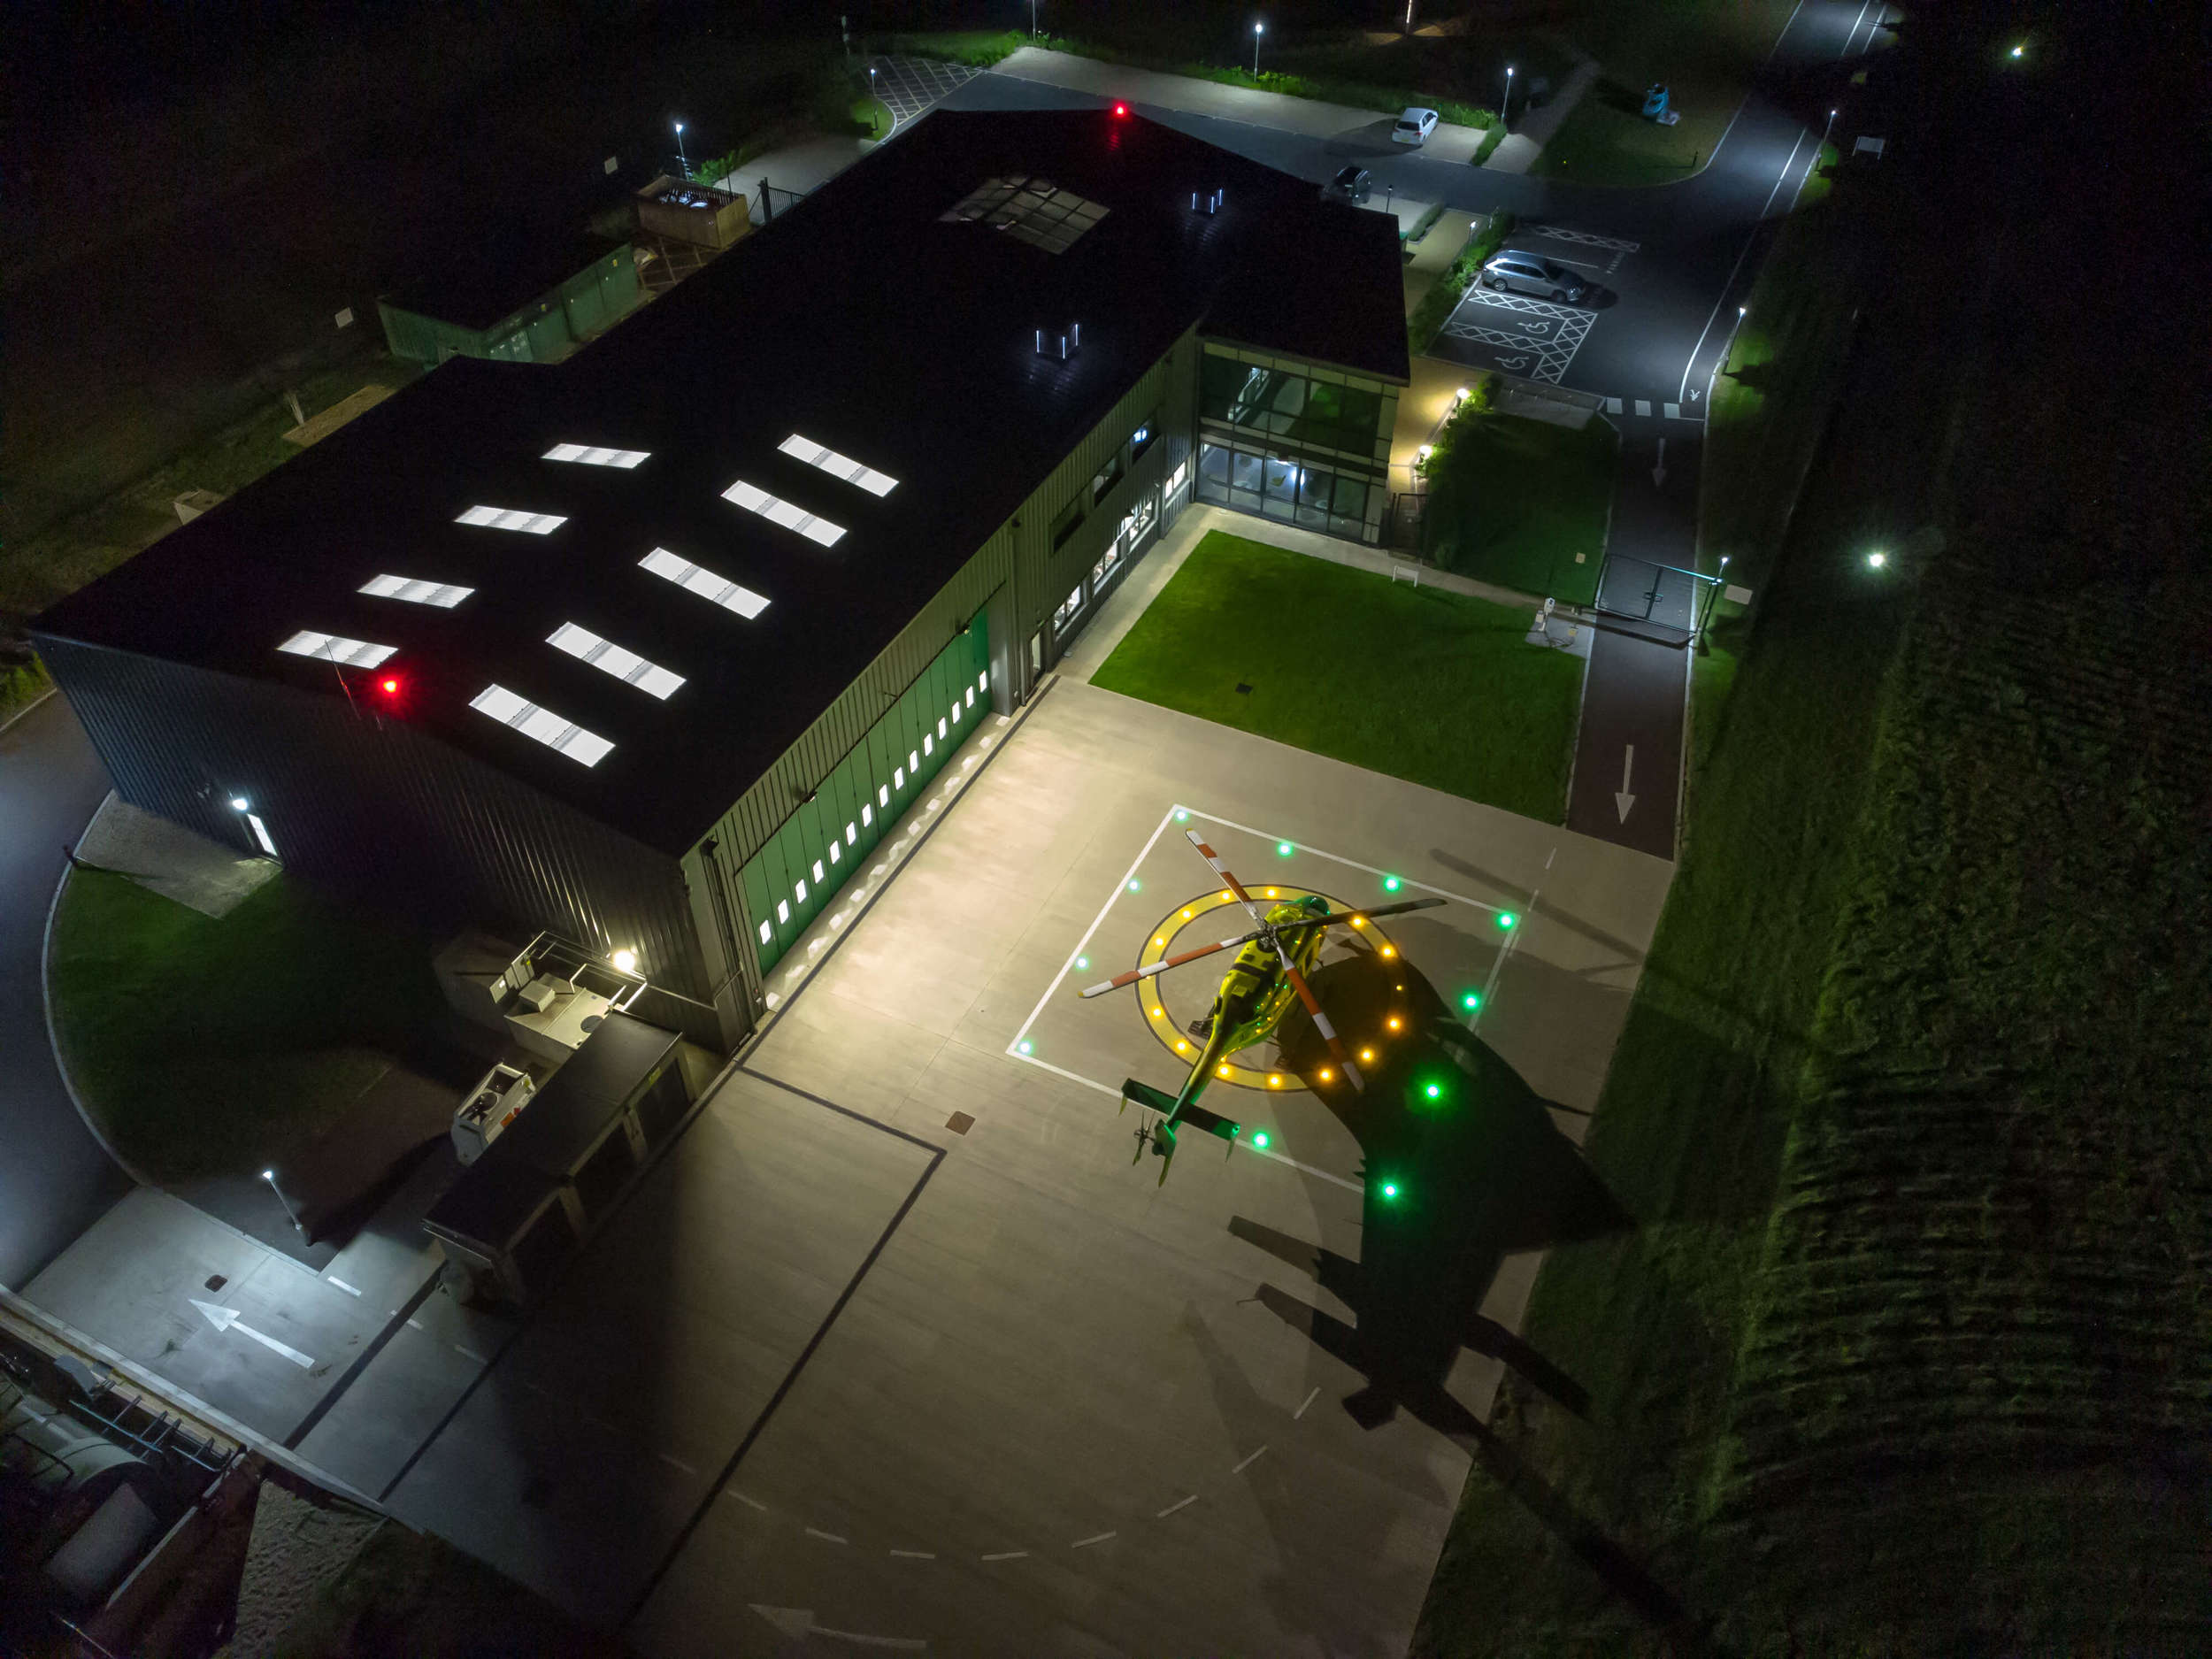 An aerial photo taken of the airbase at night. The helicopter is sat on the helipad and has bright green and yellow lights shining in a square and circle shape.